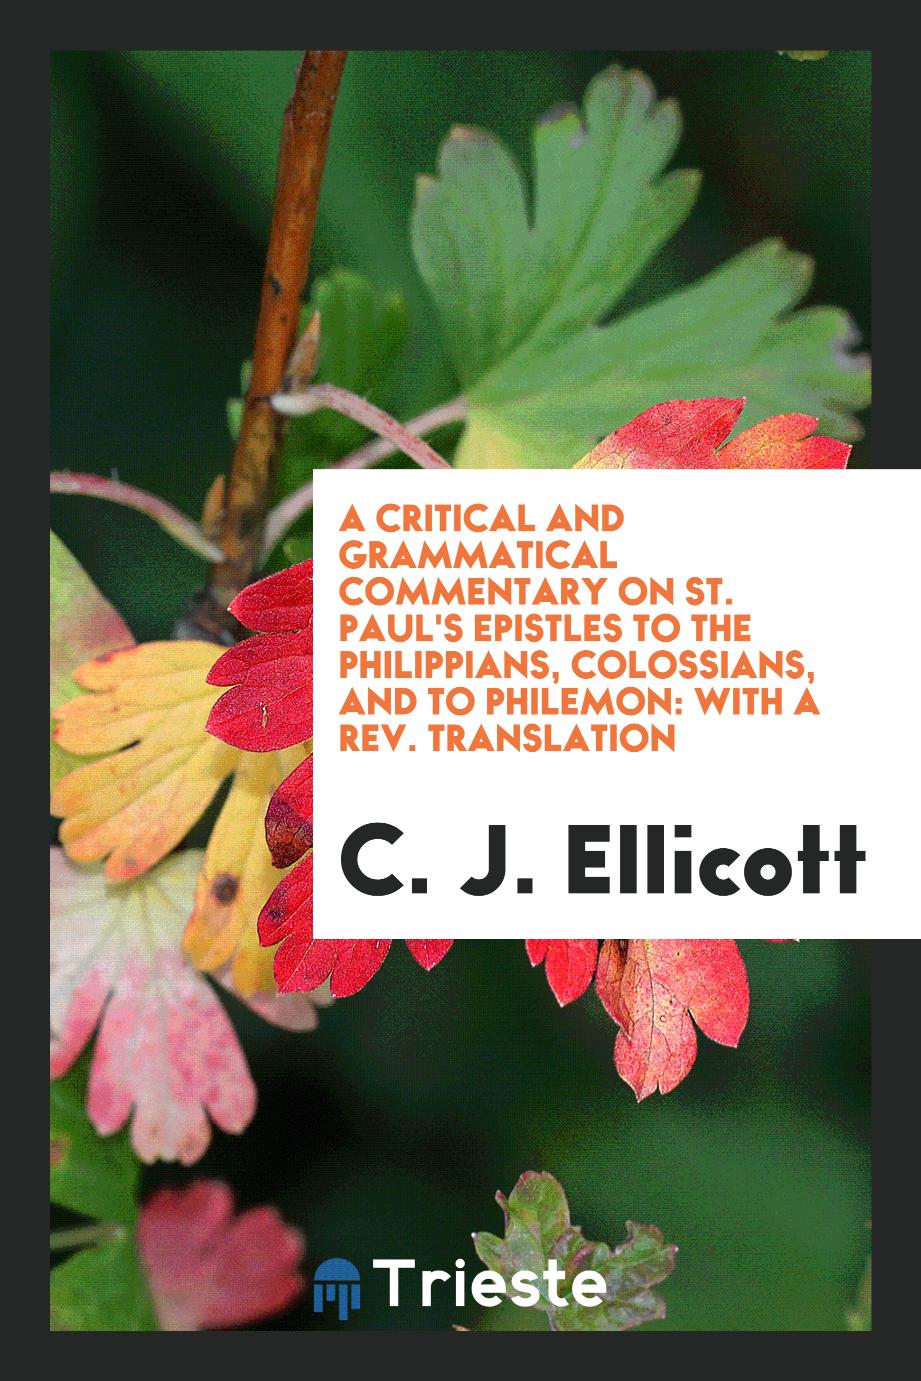 A critical and grammatical commentary on St. Paul's Epistles to the Philippians, Colossians, and to Philemon: with a rev. translation